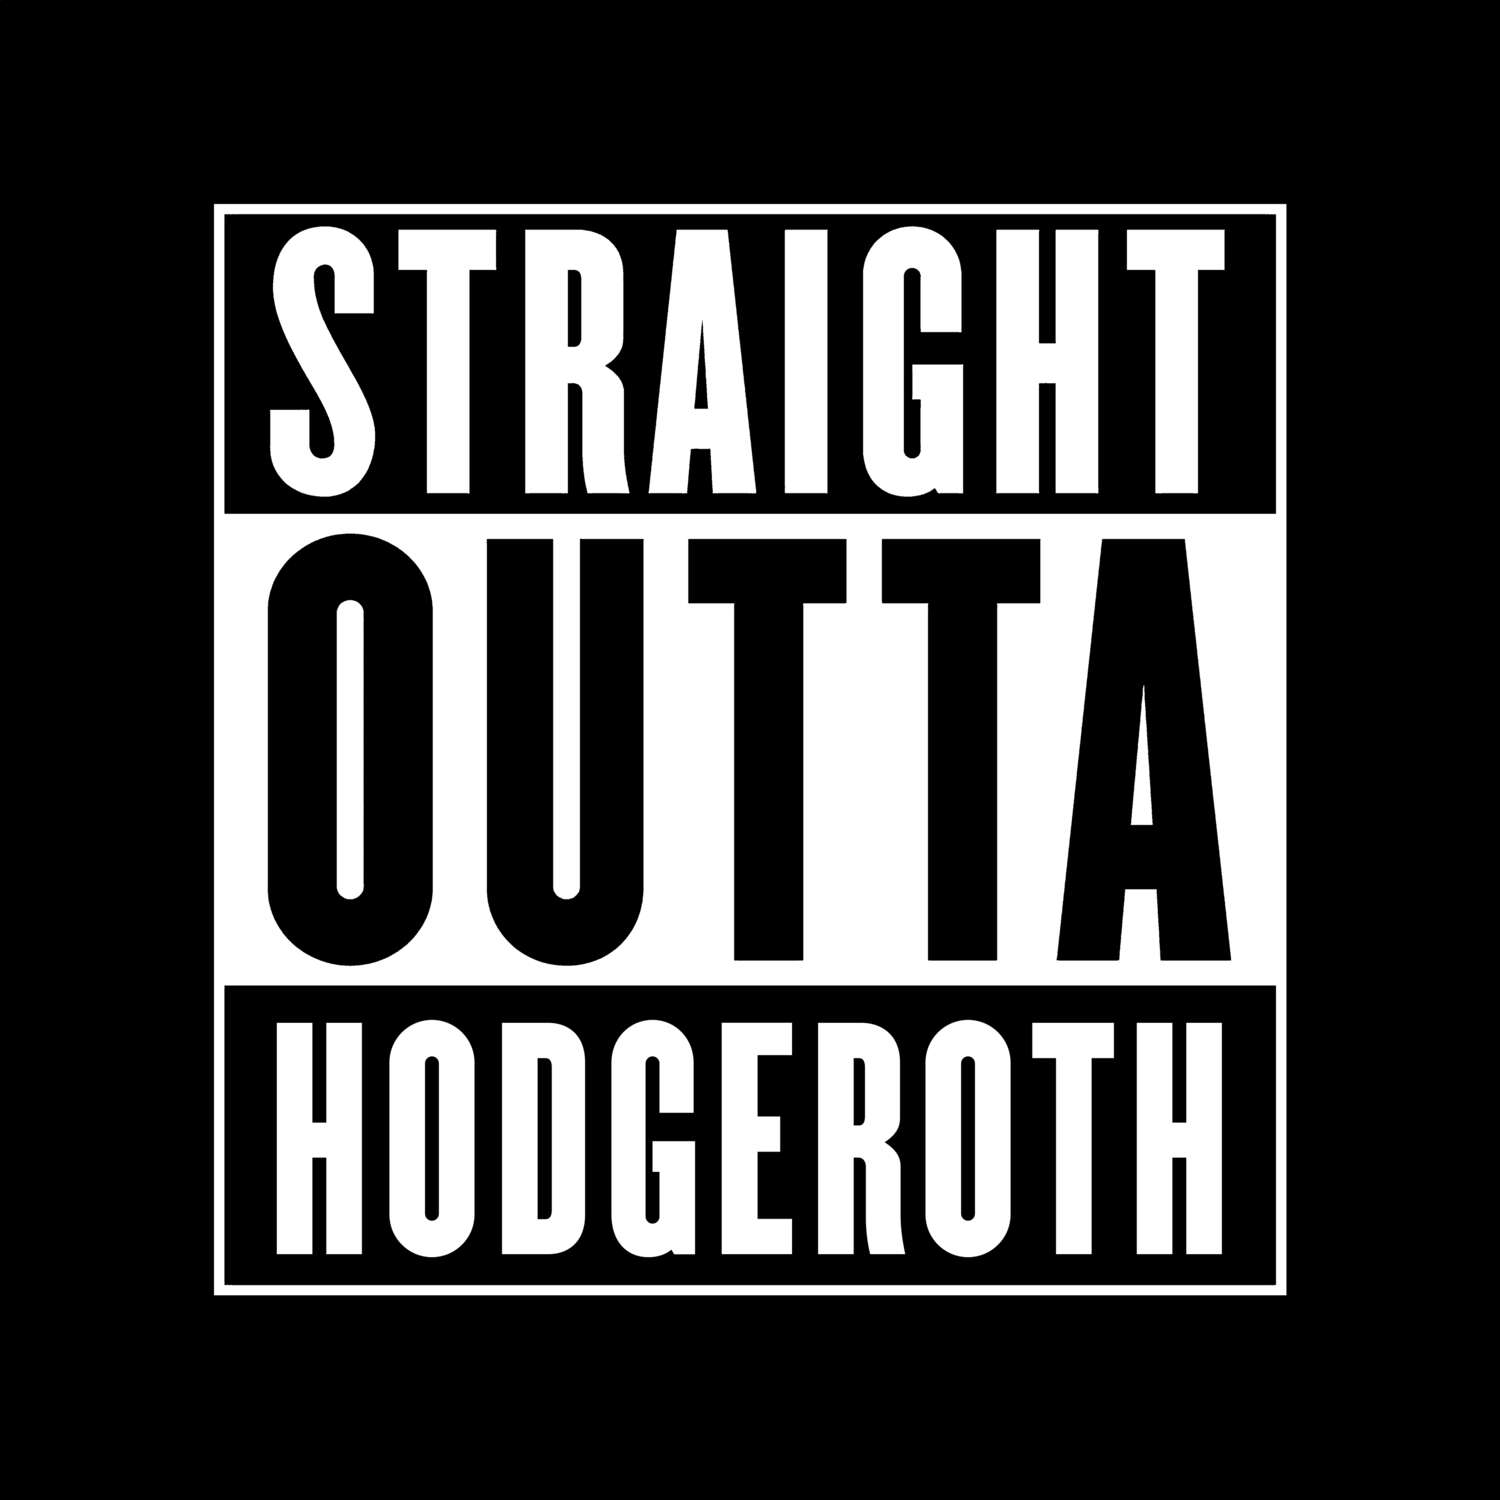 Hodgeroth T-Shirt »Straight Outta«